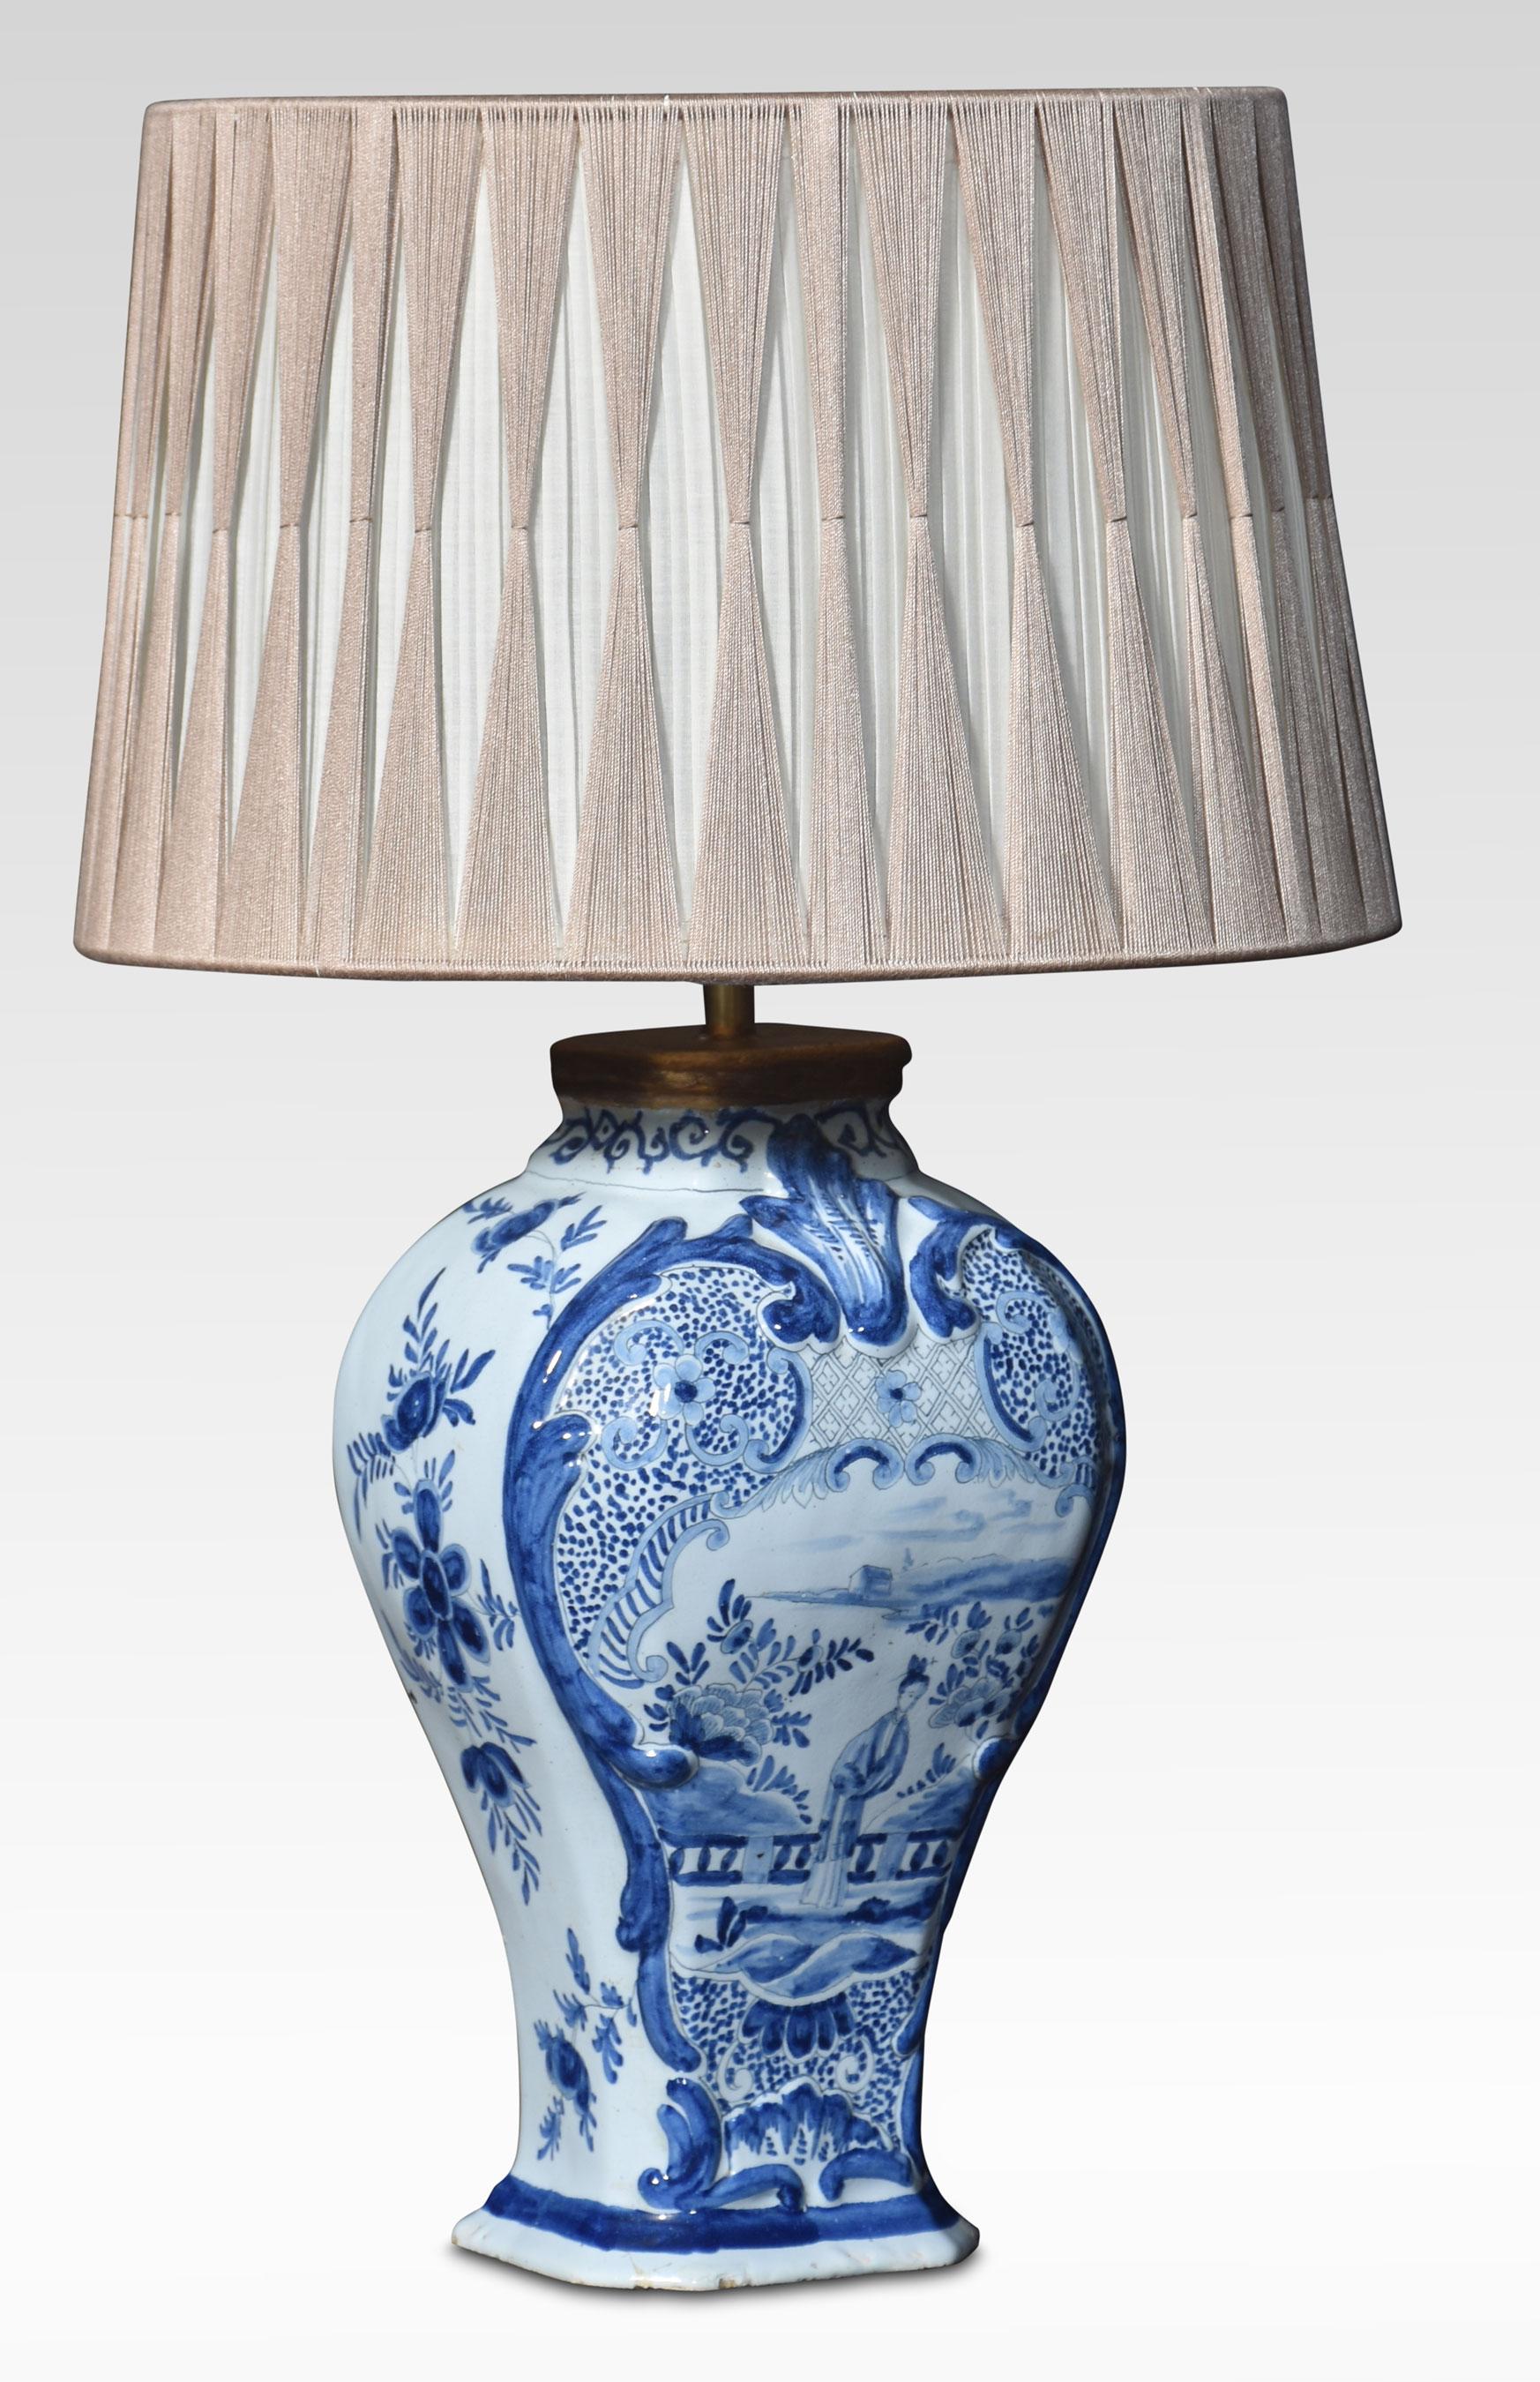 Chinese blue and white vase lamp decorated with oriental scenes and foliage. The lamp has had some repairs.
Dimensions
Height 15.5 Inches
Width 7.5 Inches
Depth 7.5 Inches